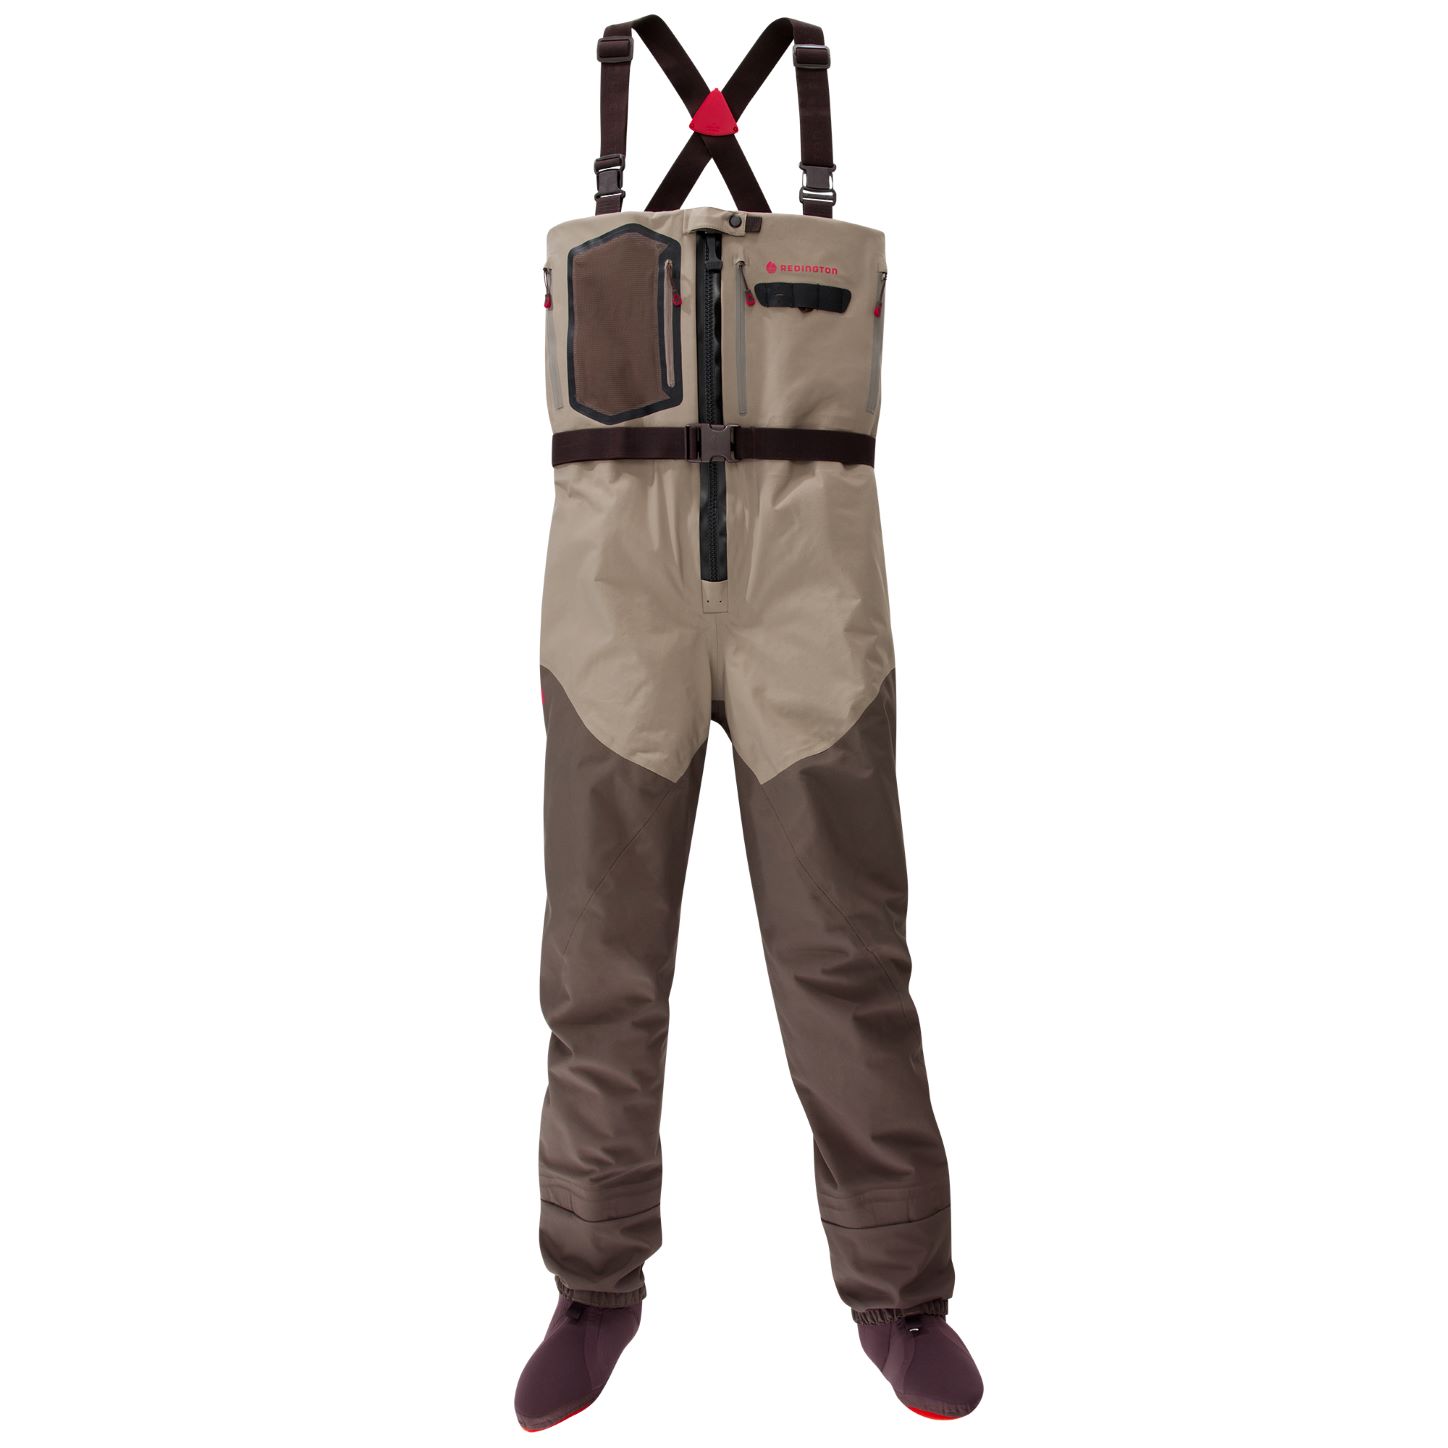 Redington fishing waders in a brown-beige colour